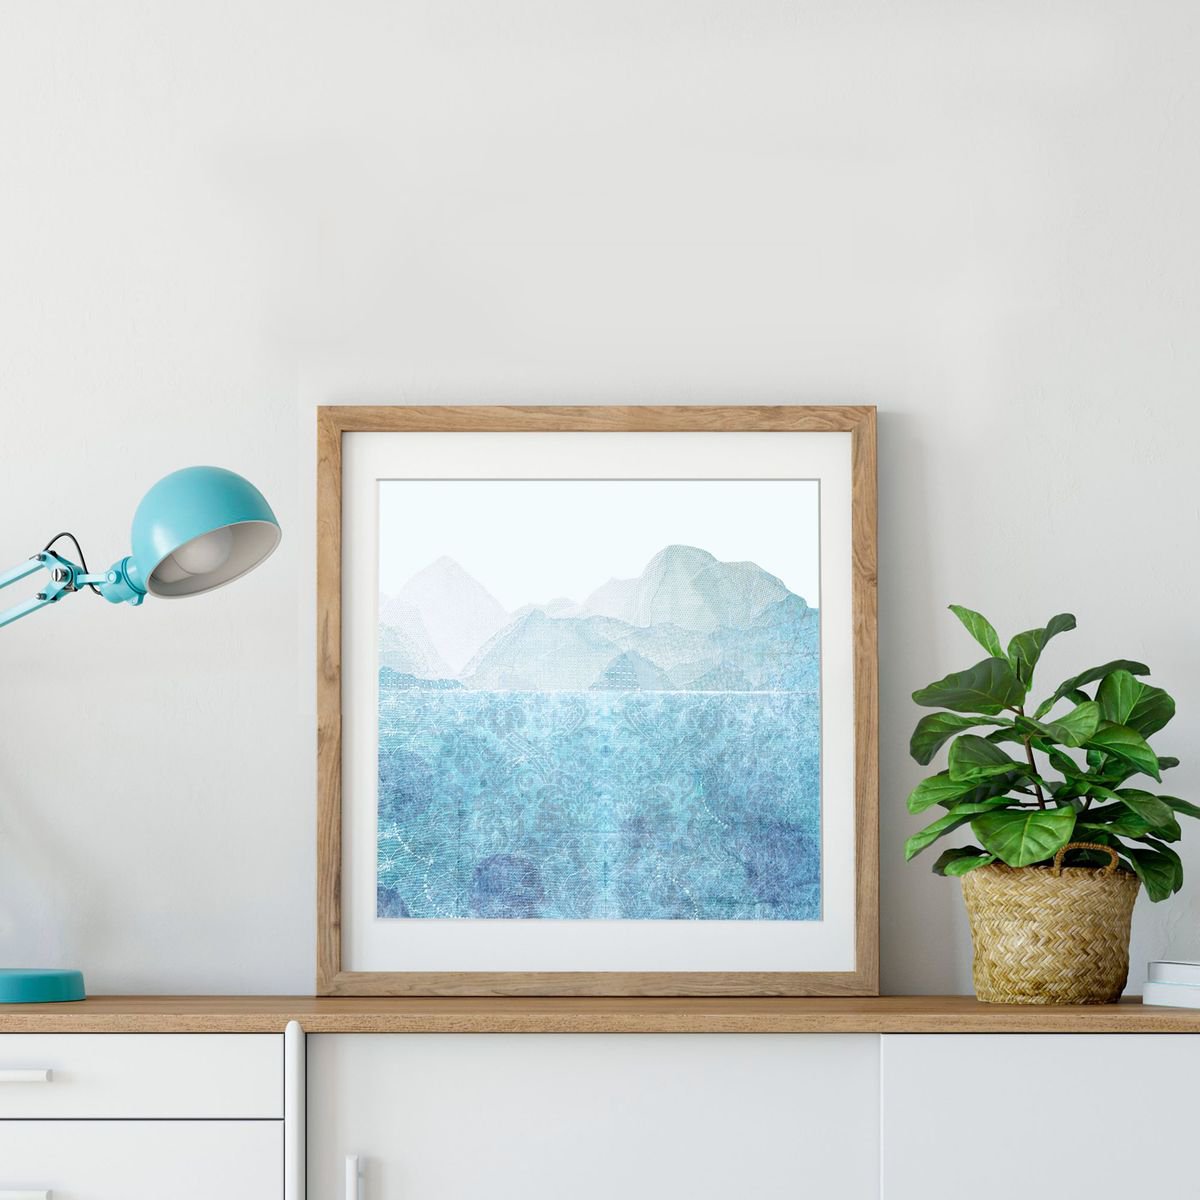 Blue lake - new zealand inspired limited edition landscape print by Jennifer Bell